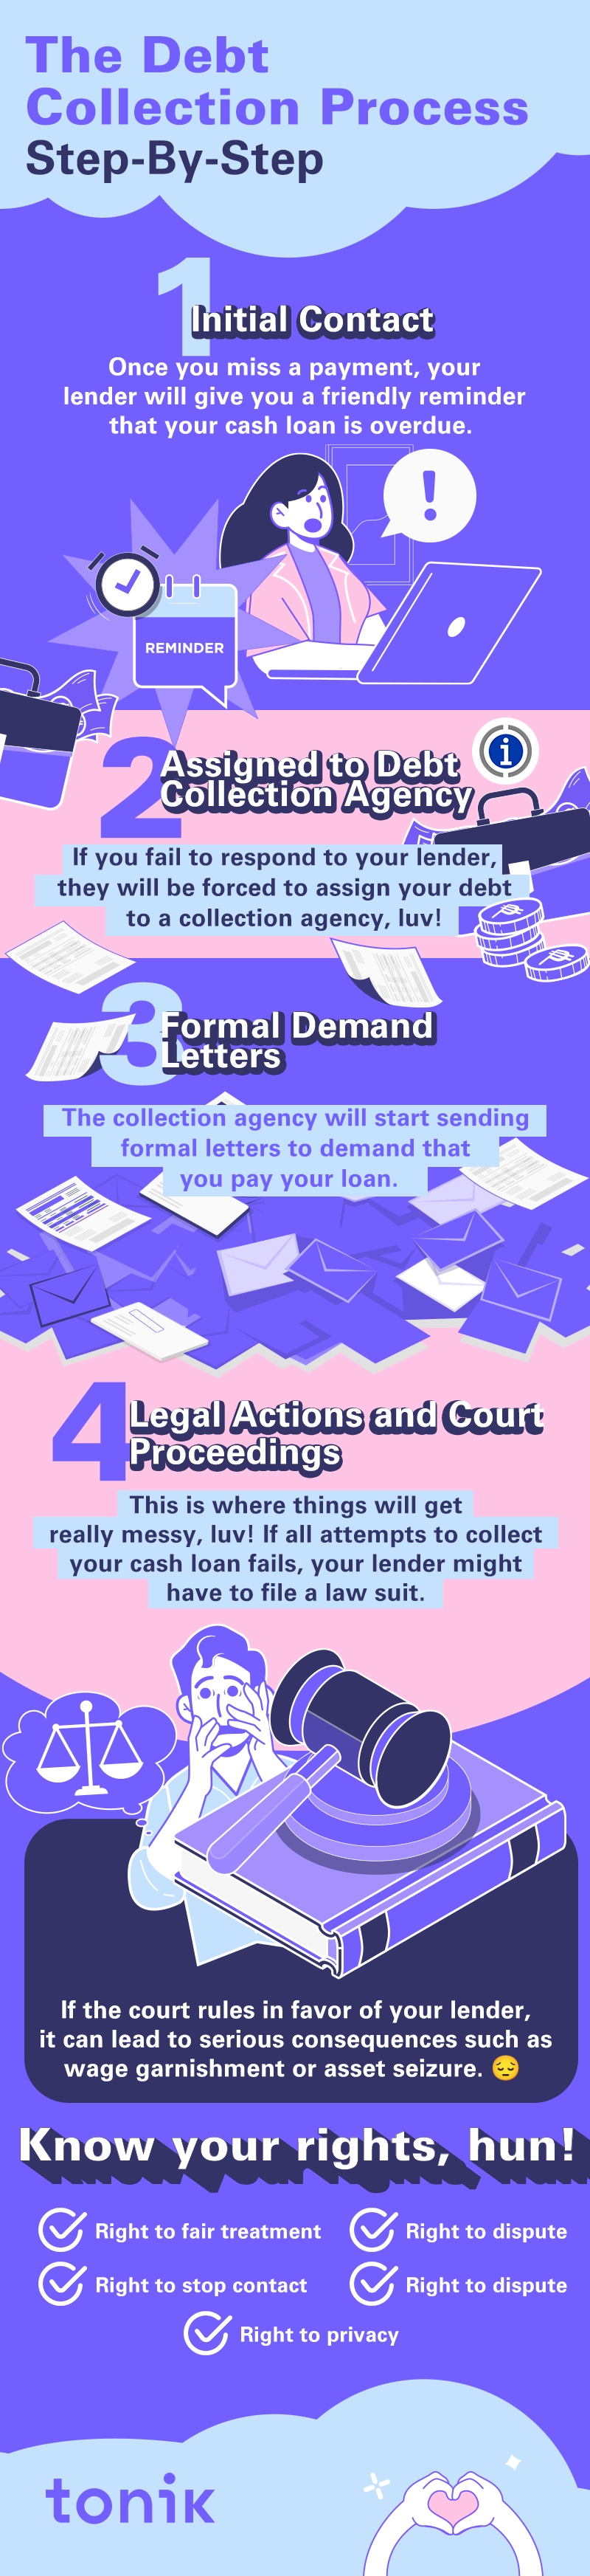 infographic that illustrates the debt collection process for unpaid cash loans in the Philippines